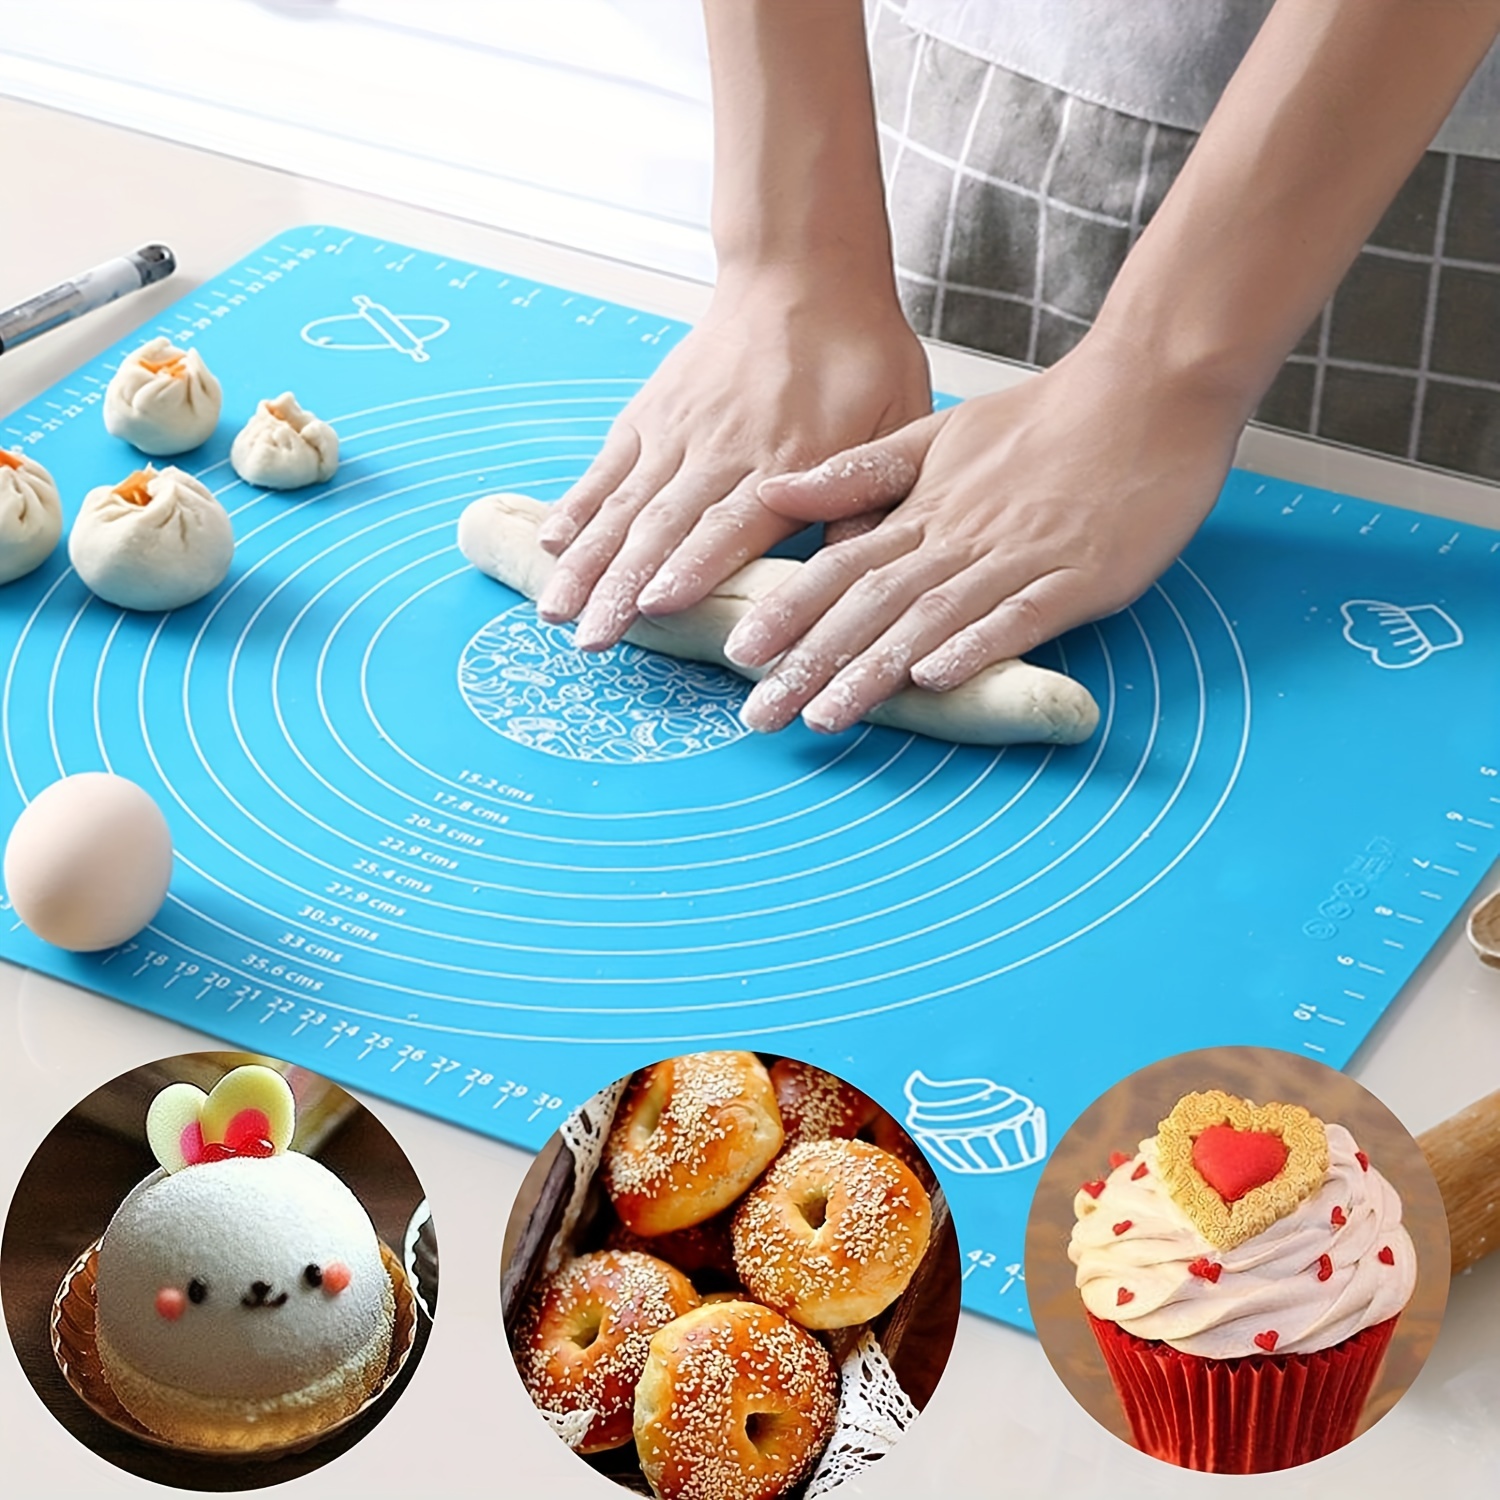 Extra Large Kitchen Silicone Pad - 2023 New Non Slip Non Stick Silicone  Mats For Rolling Out Dough, Baking Mats Silicone For Baking Cookie Sheets,  Thick 